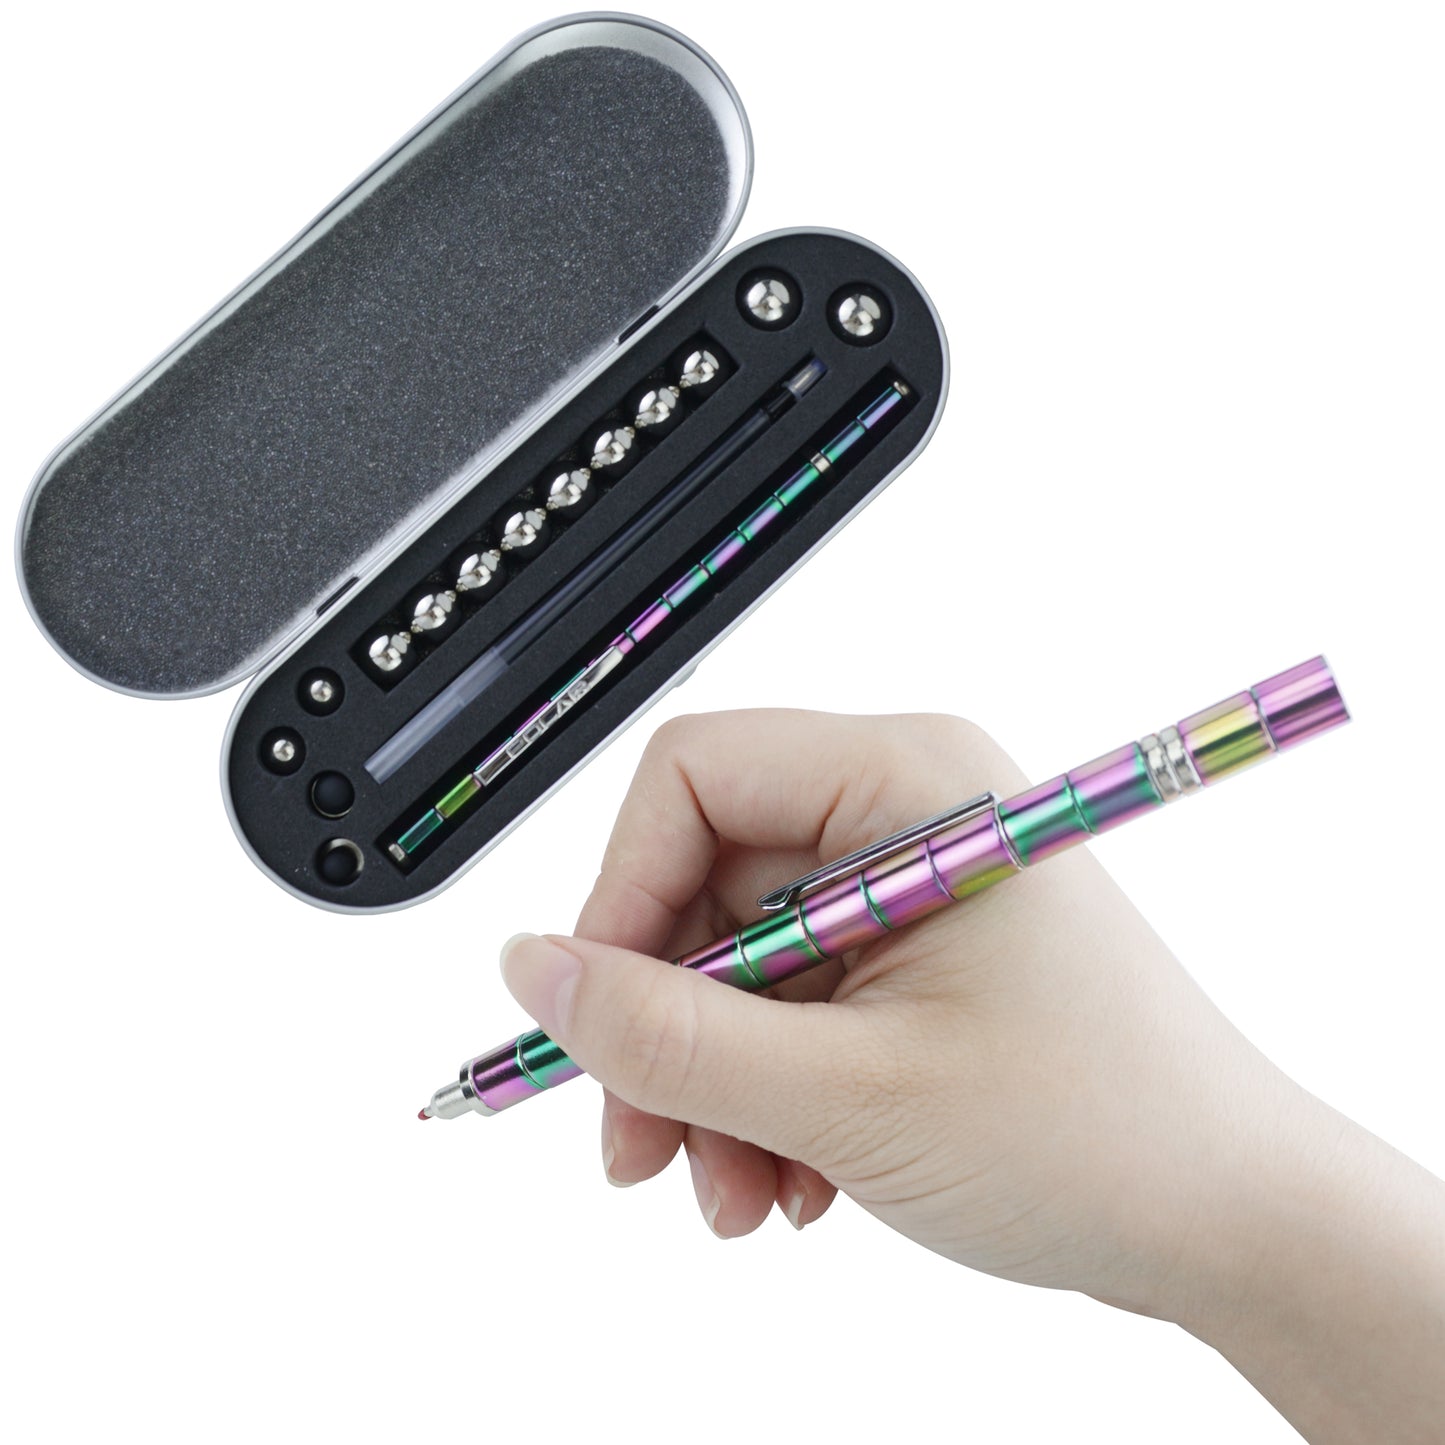 2 Pack Toy Pen, Magnetic Fidget Pen, Multifunctional Ballpoint Pen, Traveling Tin Case, Extra Magnets, and Extra Ink Cartridges Included!